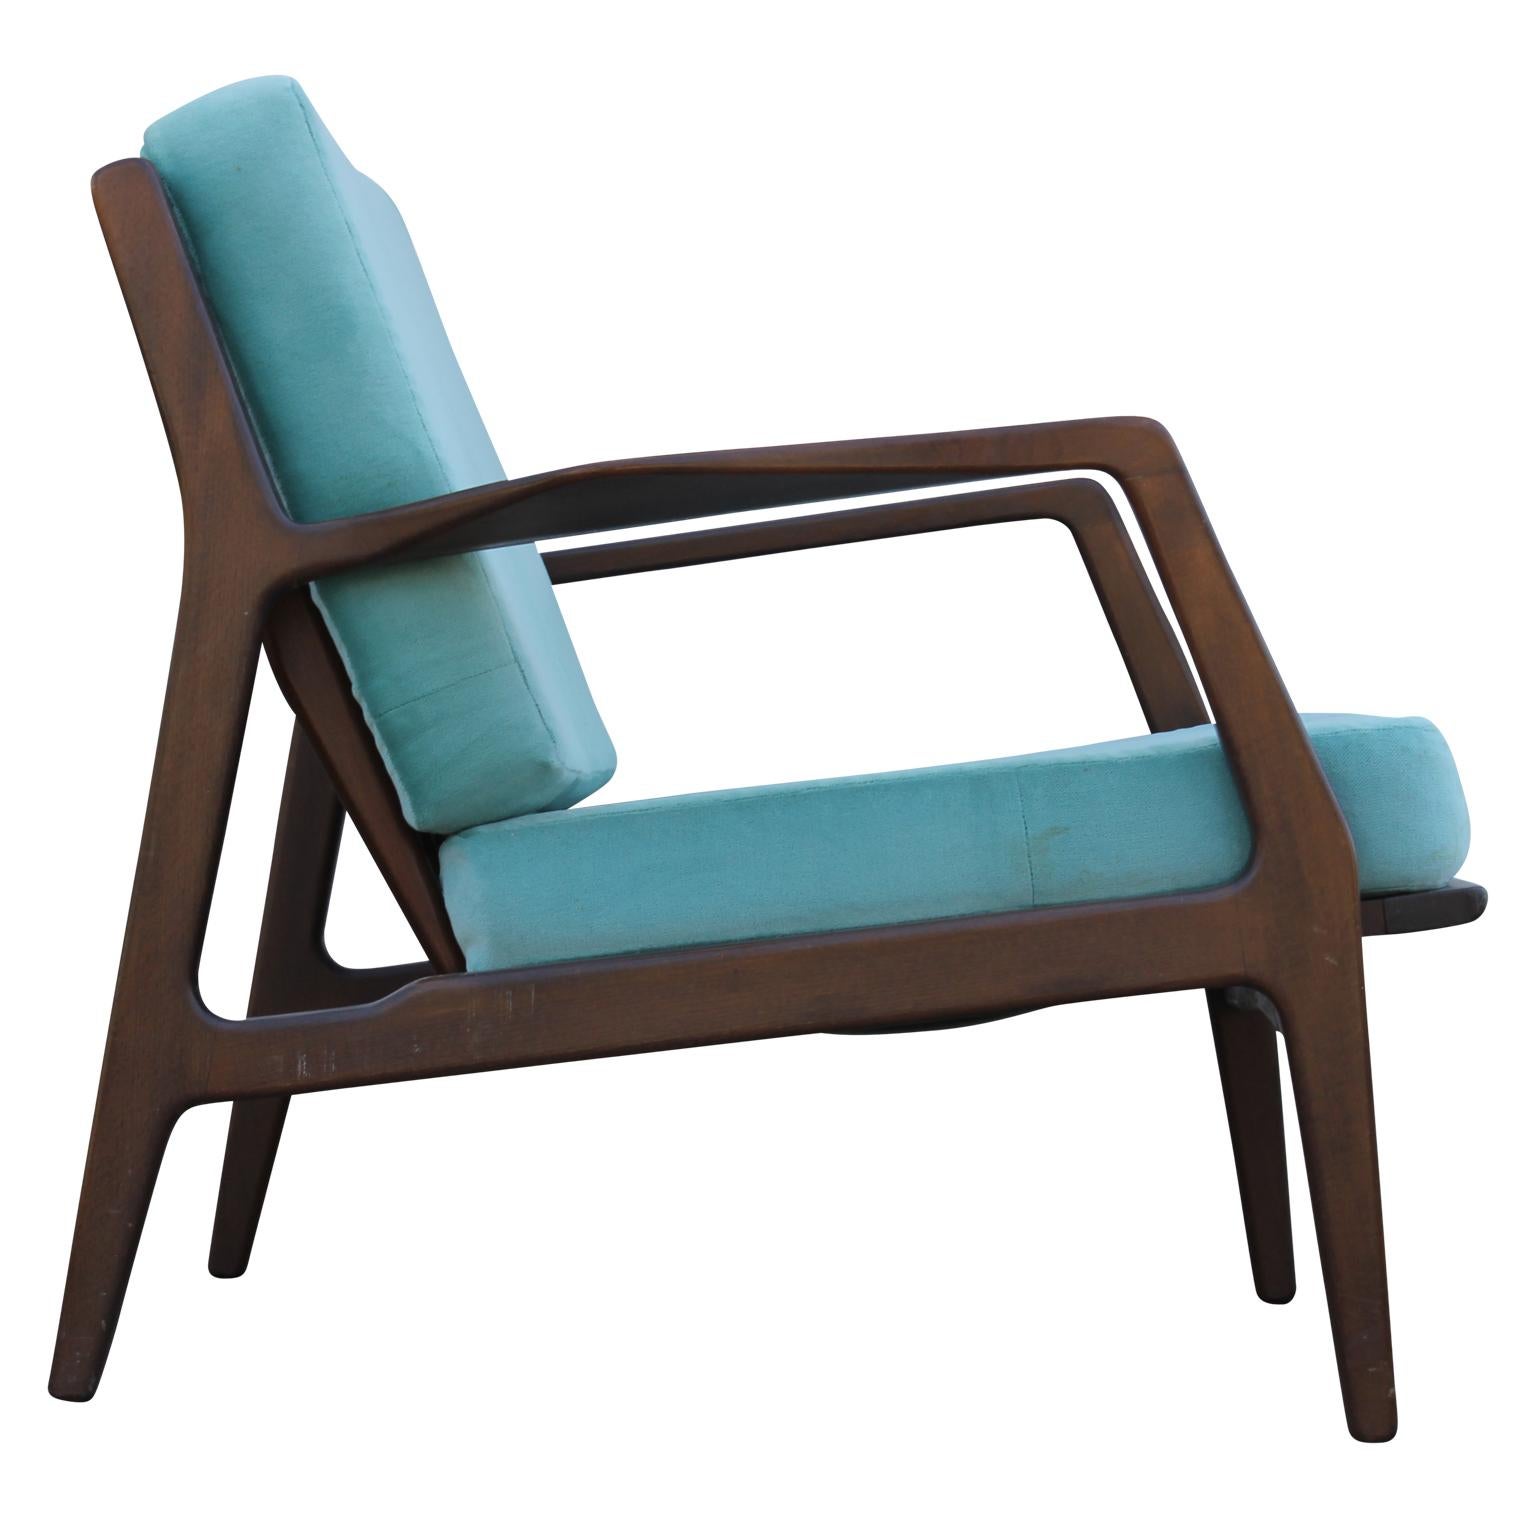 Mid-20th Century Pair of Teak Lounge Chairs for Selig by Ib Kofod Larsen